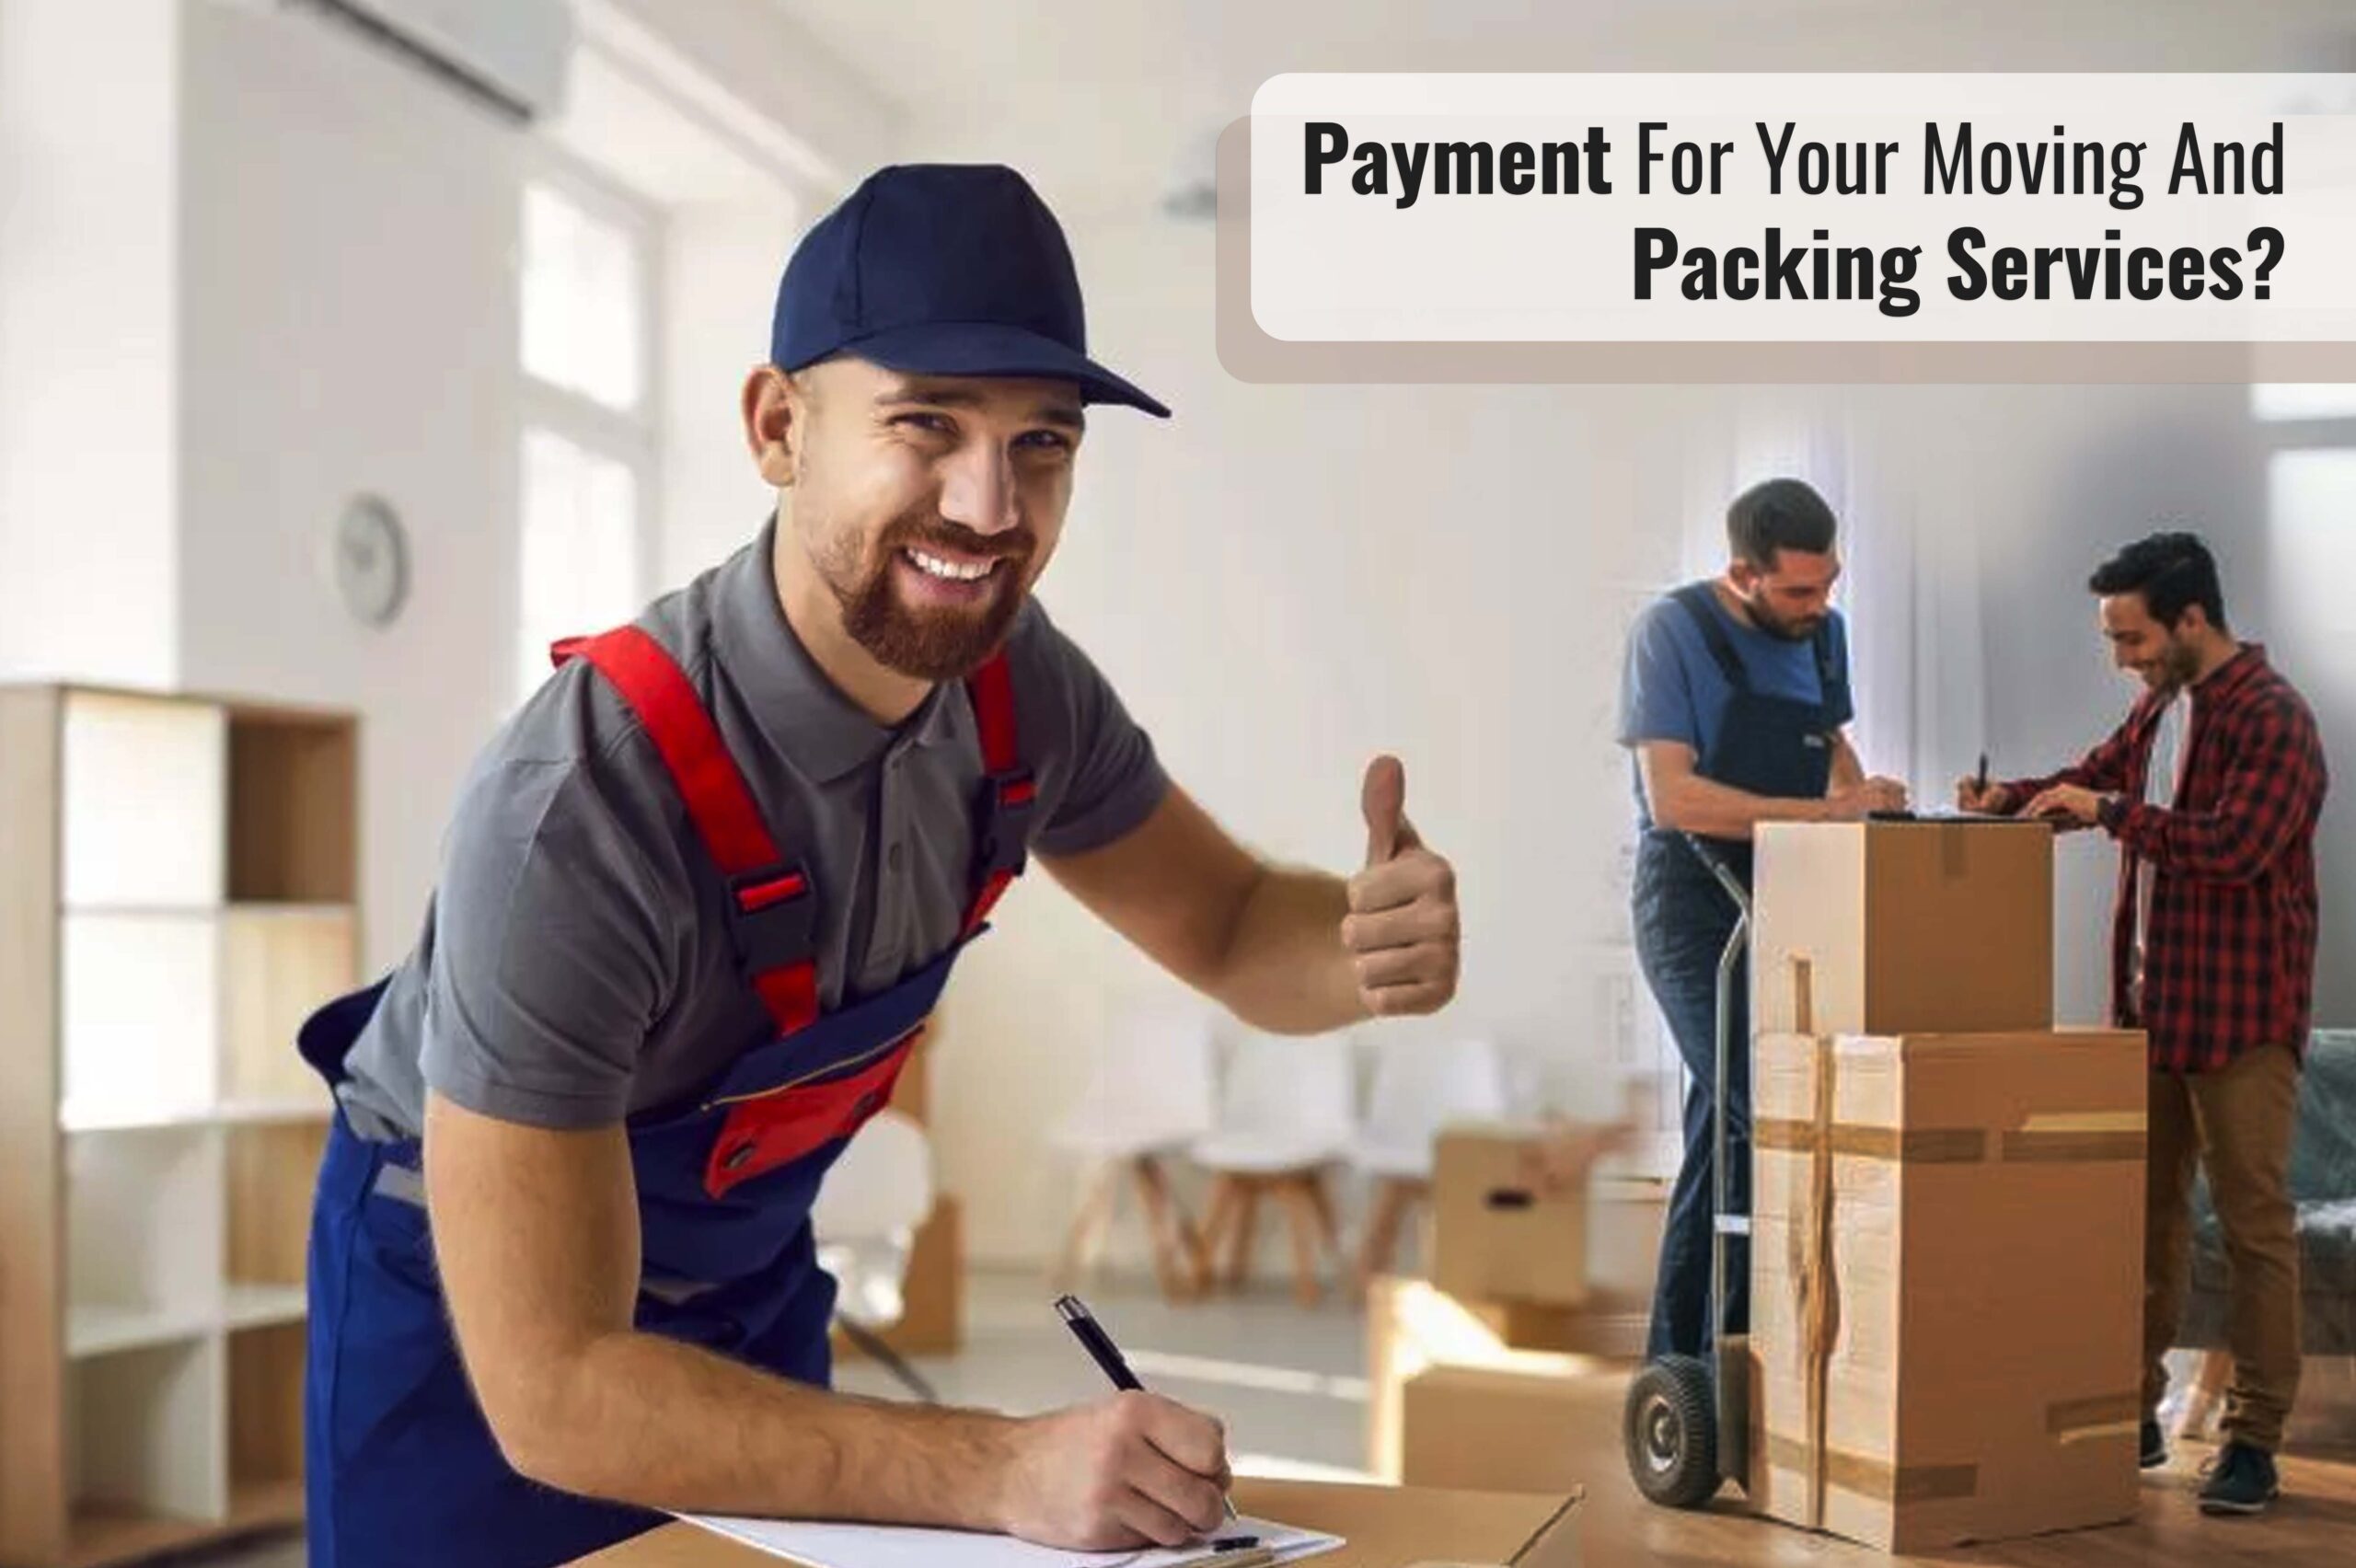 Payment for your moving and packing services